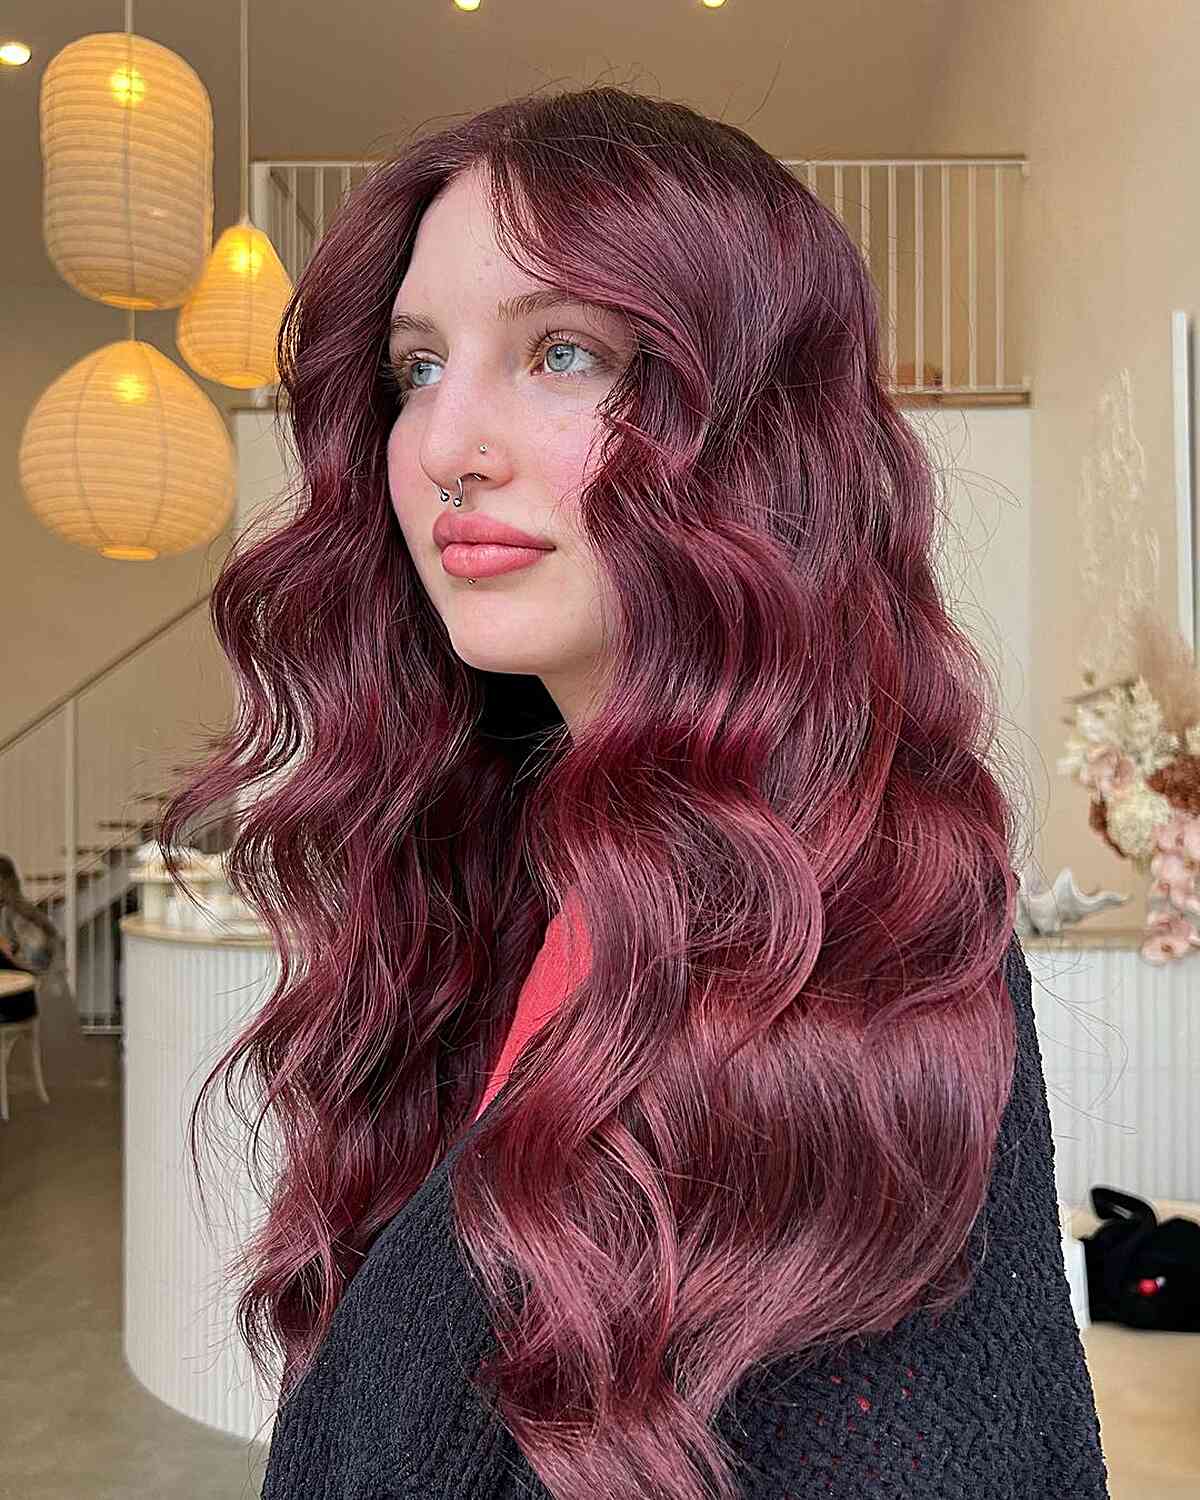 Long Middle-Parted Burgundy Waves on Women with Fair Skin